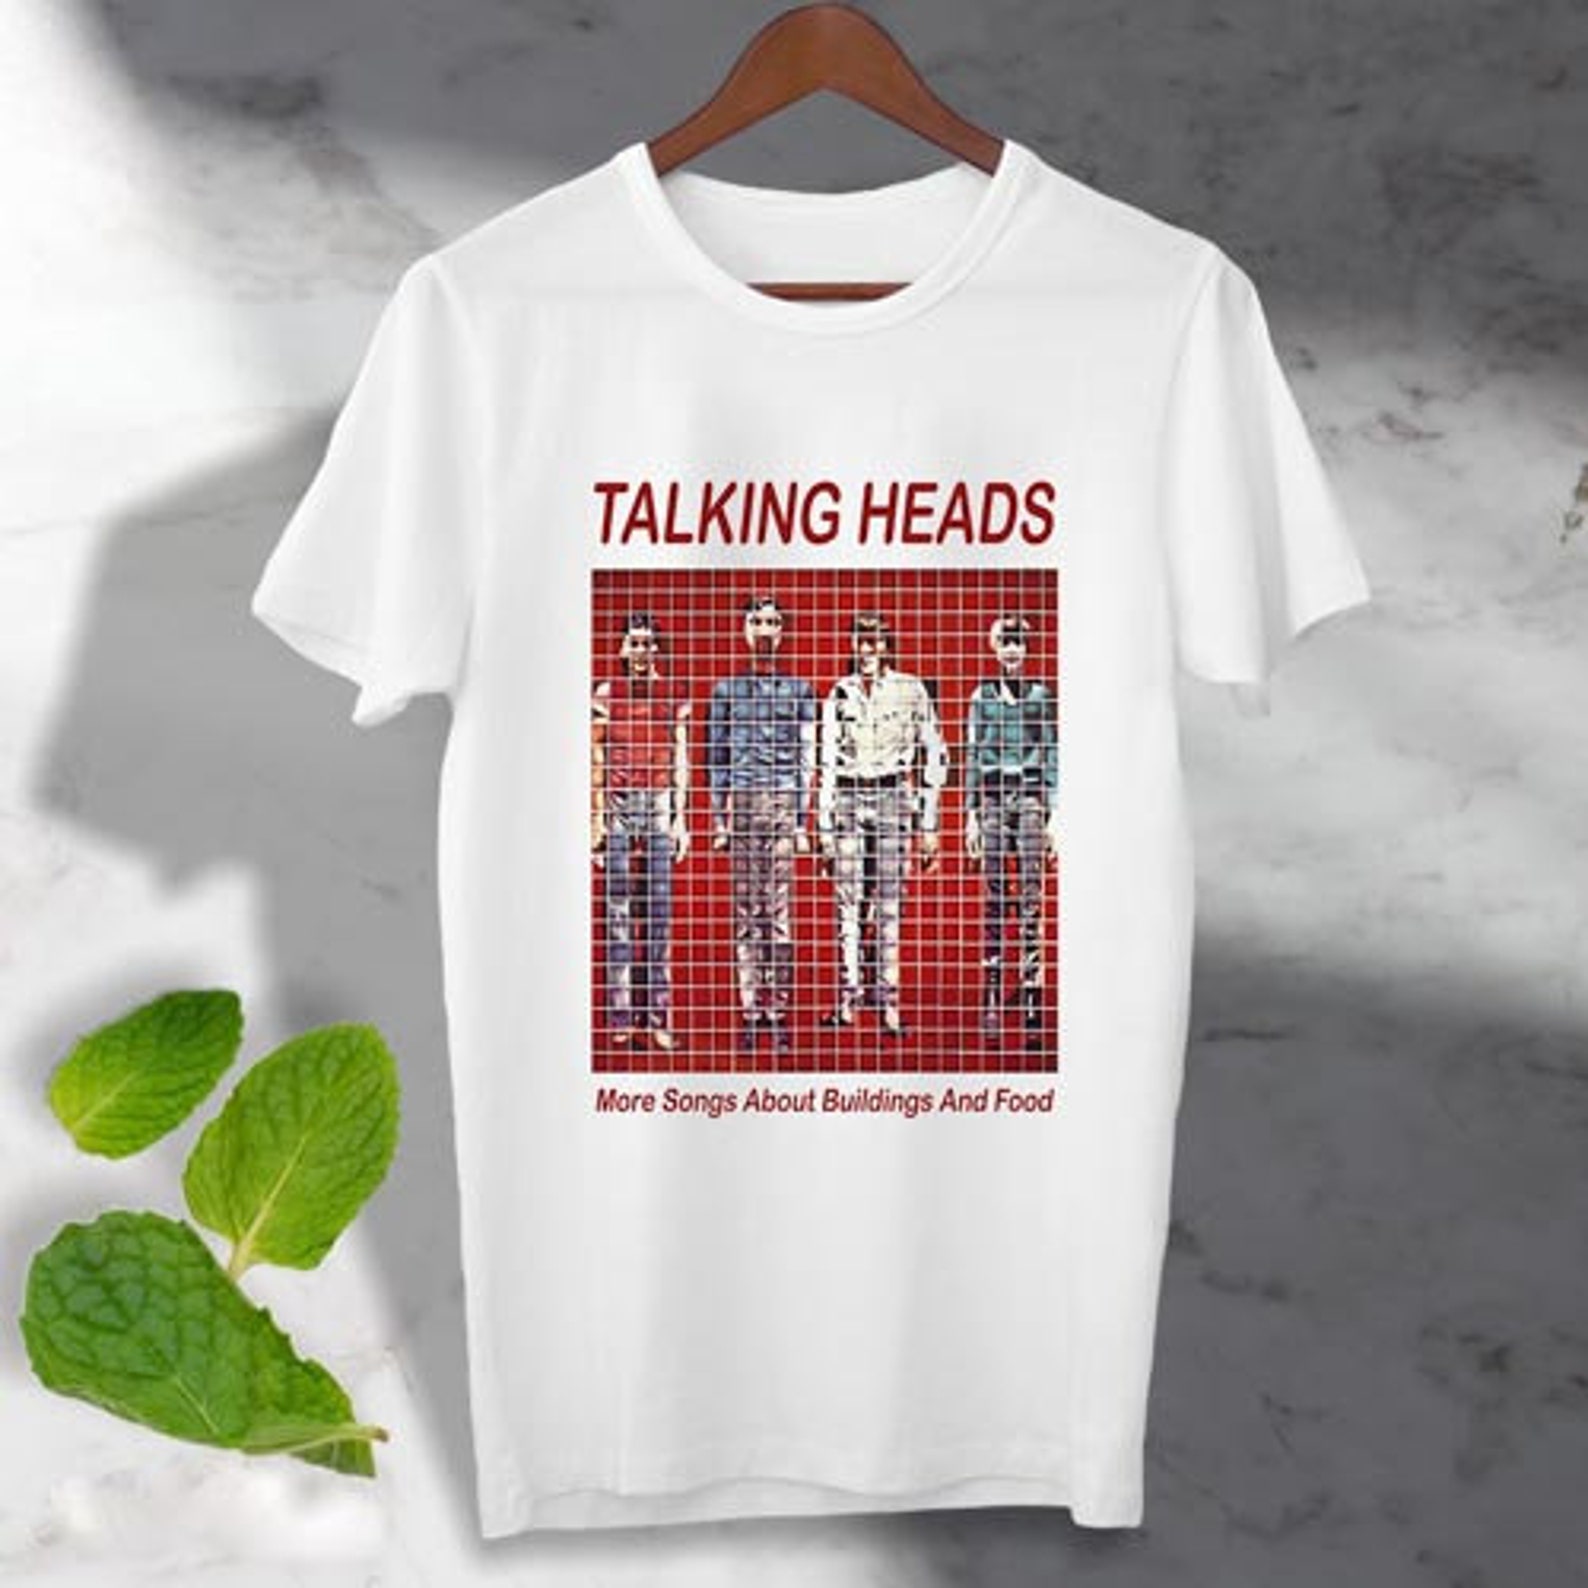 Talking Heads T Shirt More Songs About Buildings And Food T | Etsy